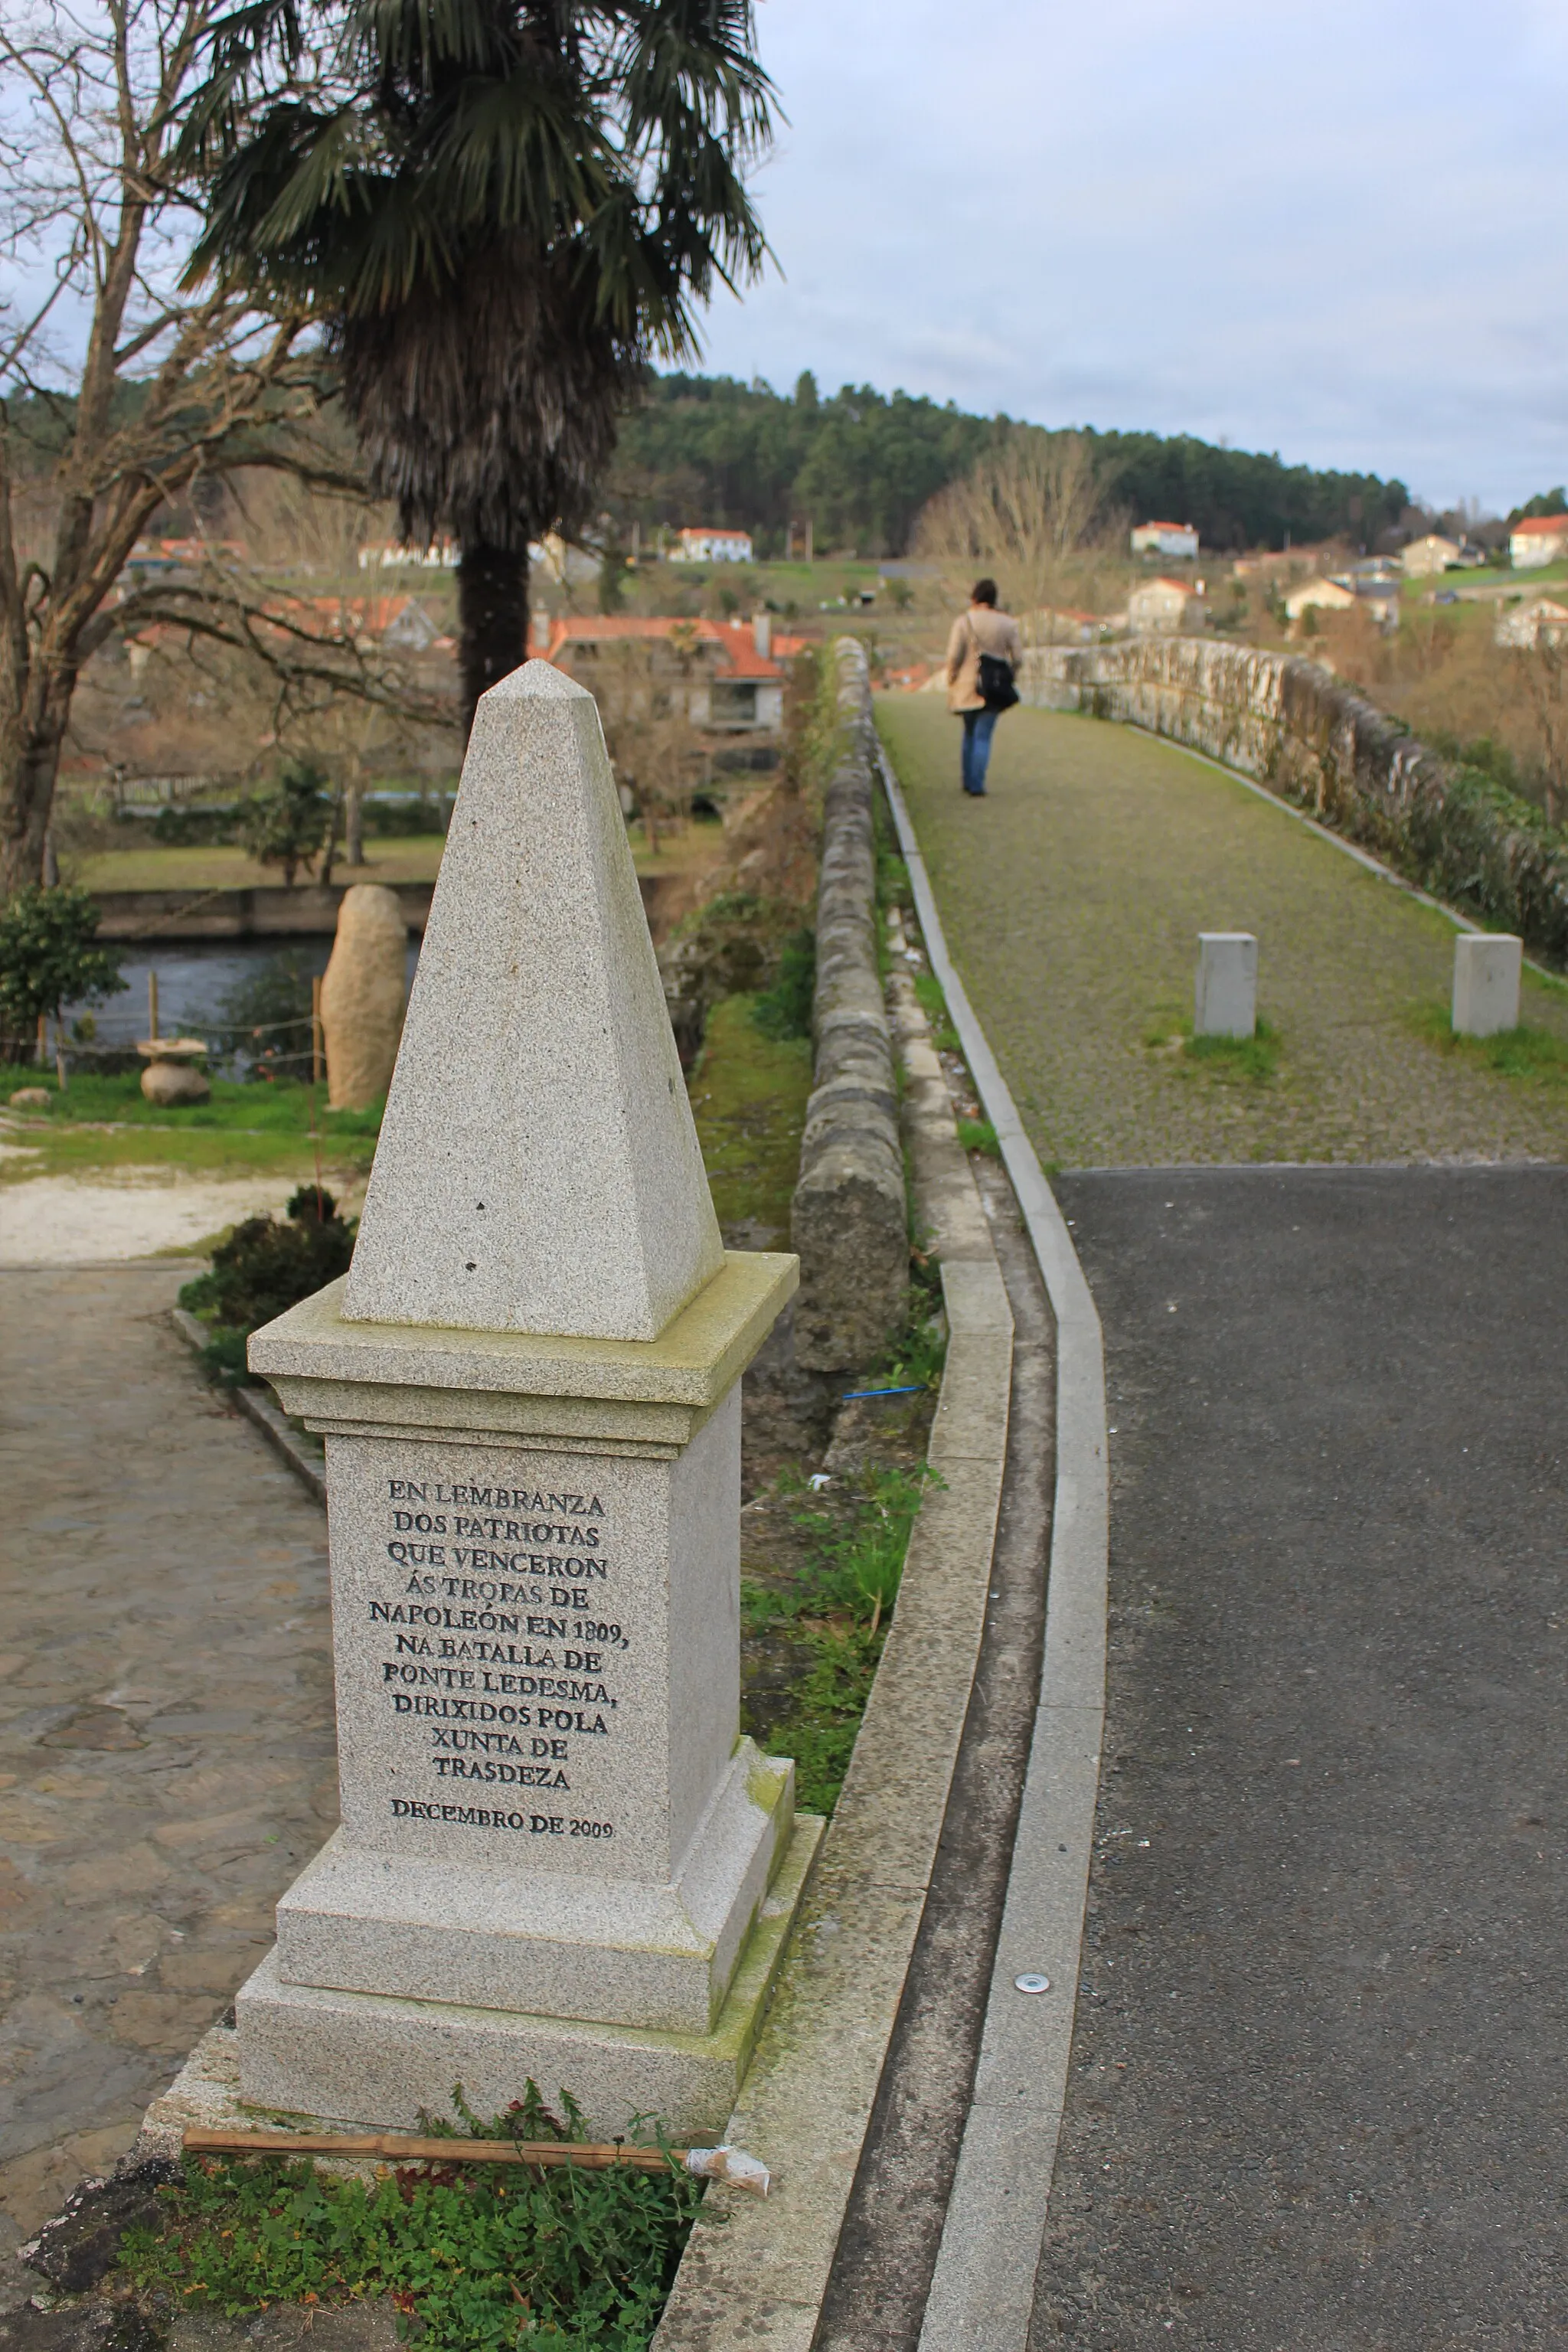 Photo showing: Tribute to the victors against Napoleon's troops in 1809 led by the Board of Trasdeza in A Ponte Ledesma, Galicia, Spain.